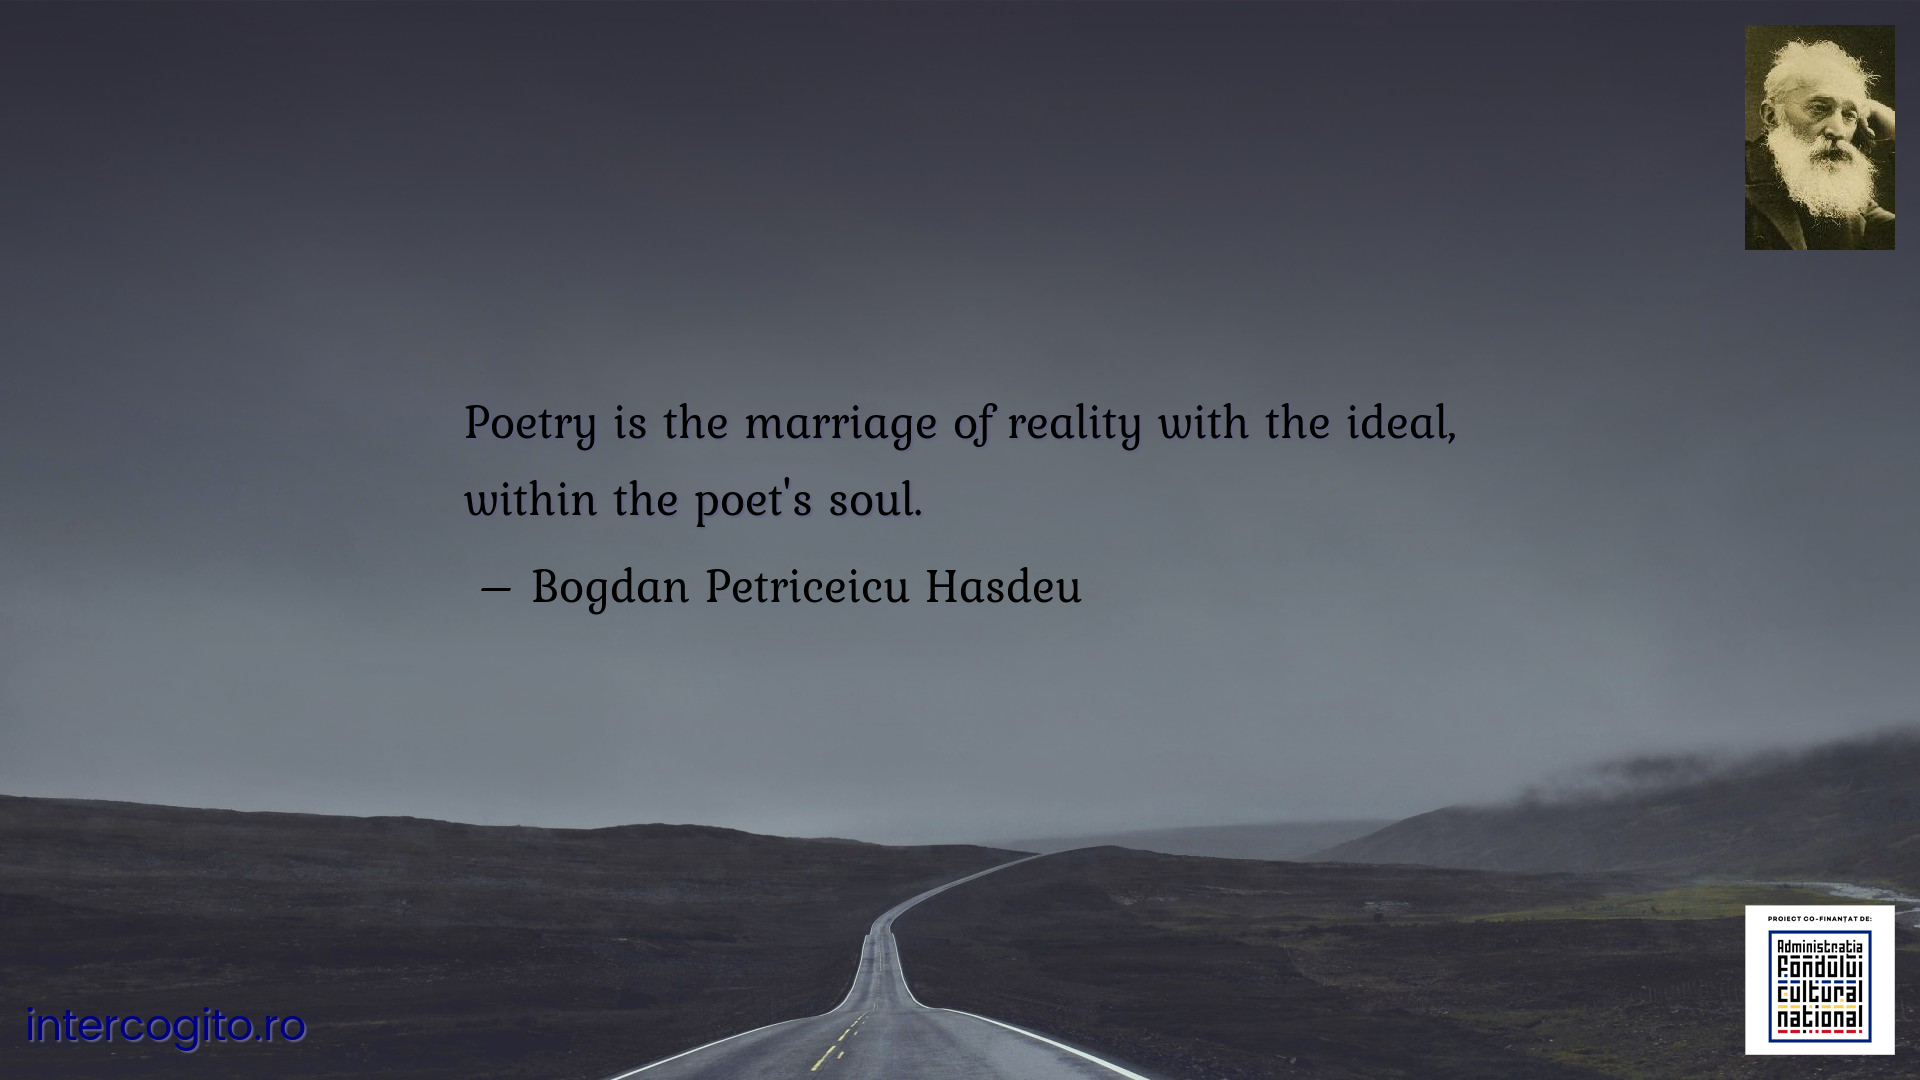 Poetry is the marriage of reality with the ideal, within the poet's soul.